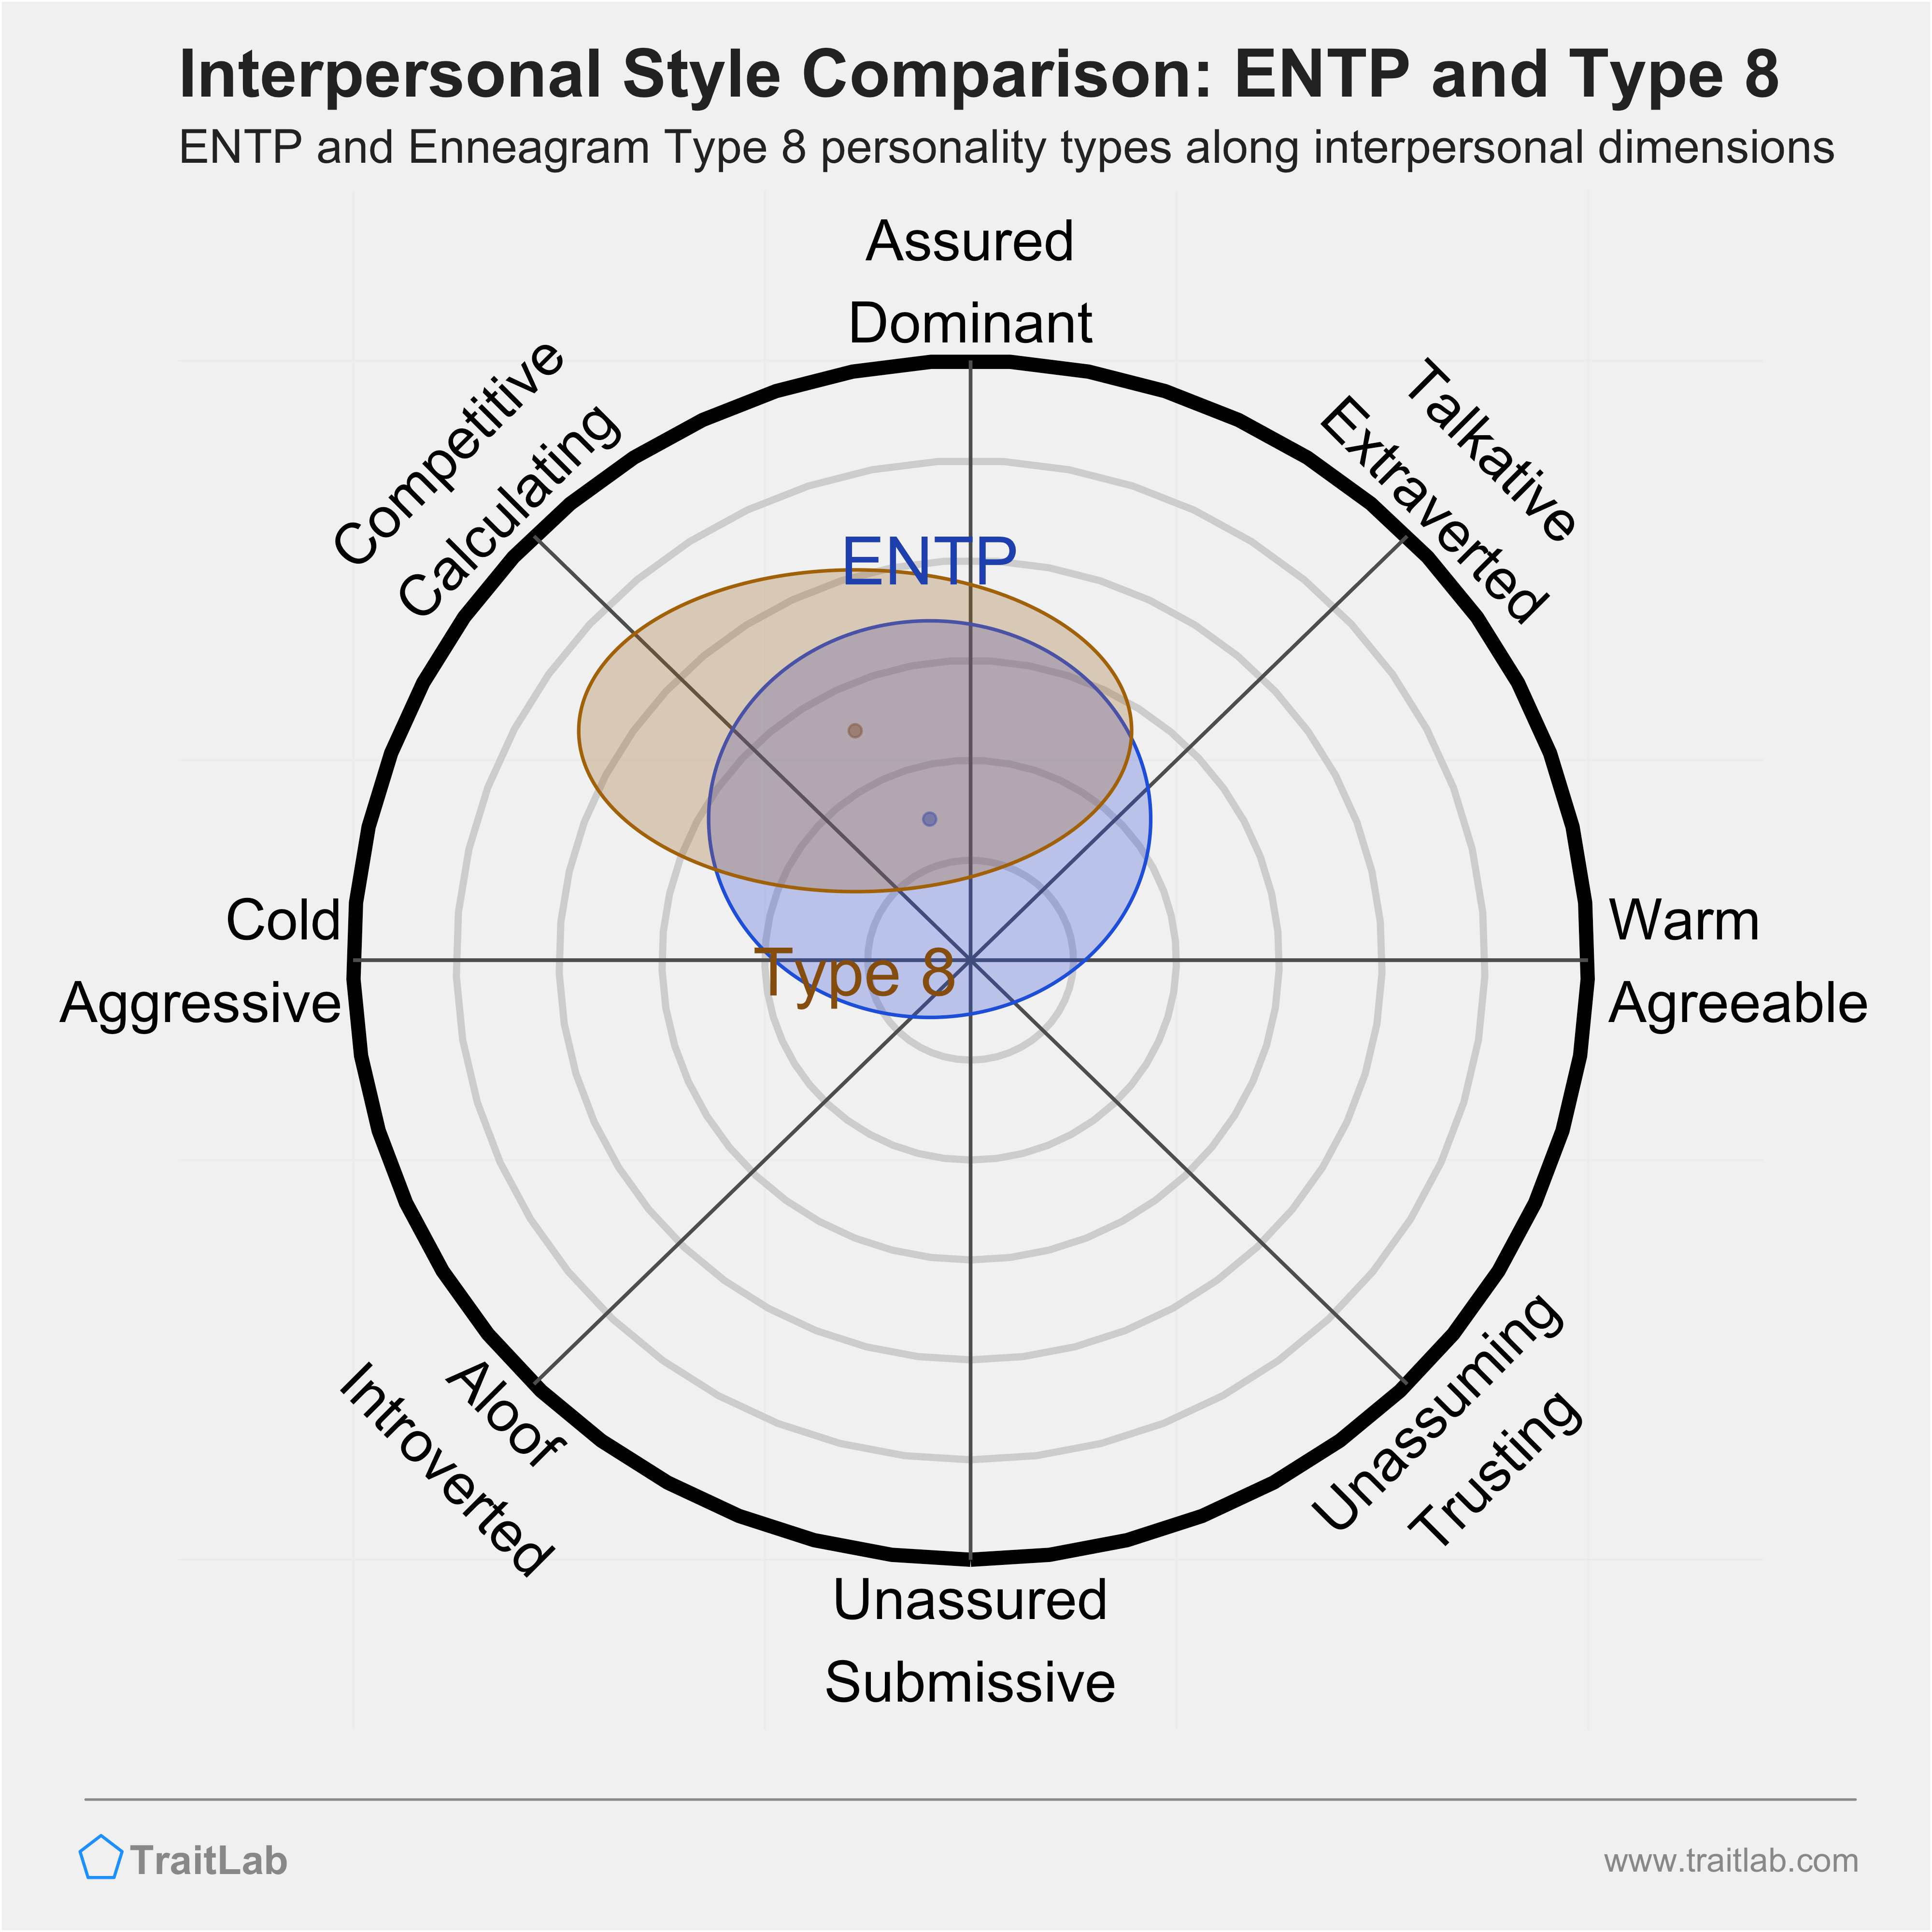 Enneagram ENTP and Type 8 comparison across interpersonal dimensions